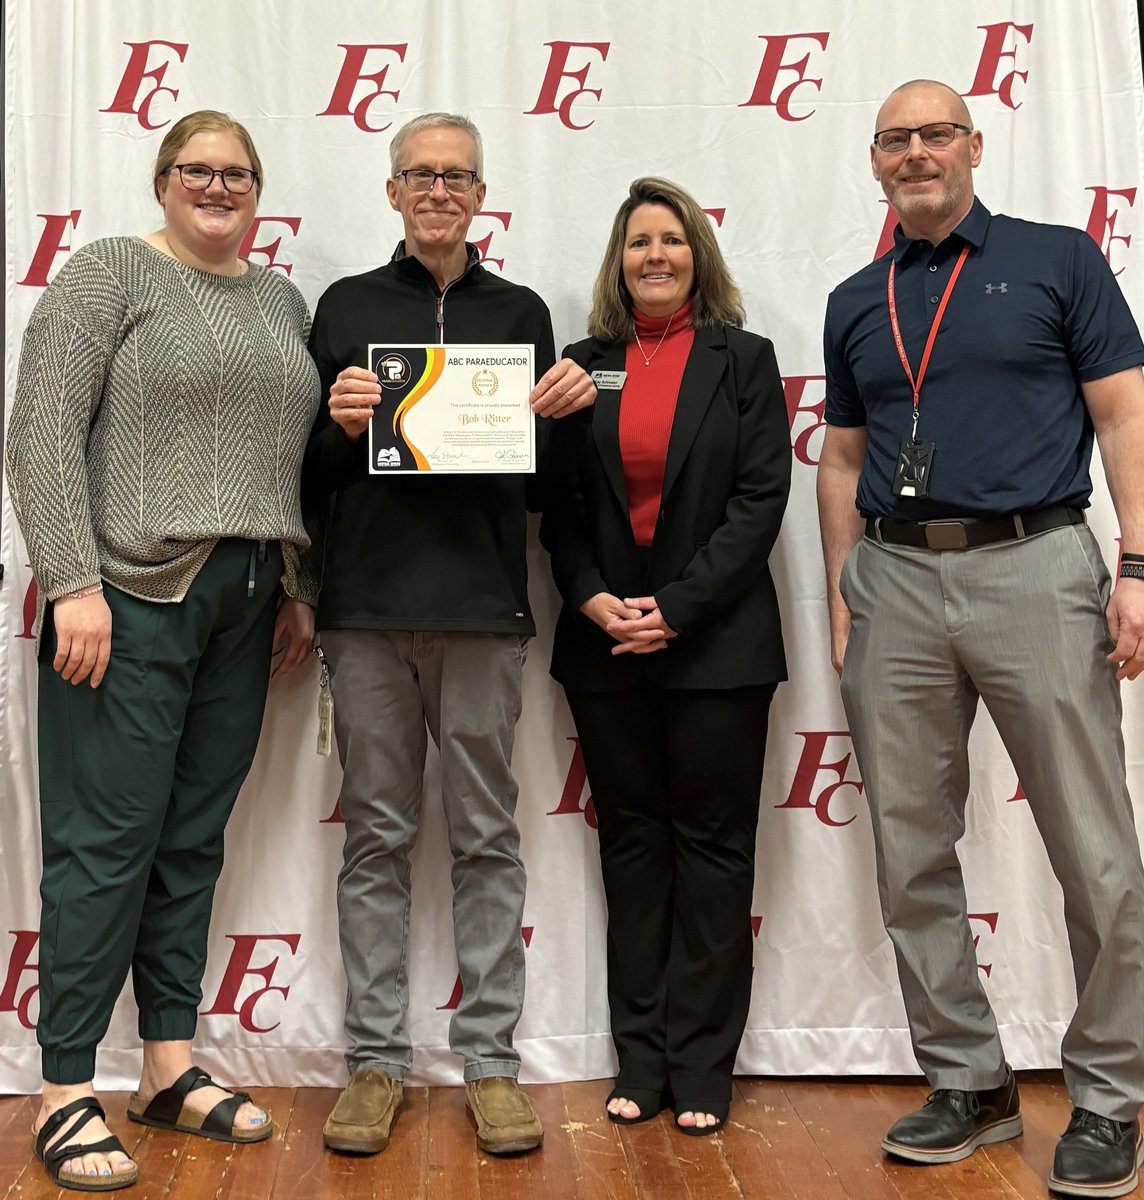 There were 66 paraeducators nominated for the #CRAEA Above & Beyond the Call (ABC) Paraeducator Award in honor of their hard work & dedication! Congrats to Forest City CSD's Bob Ritter! 👏 #EveryDayAtAEA #iaedchat